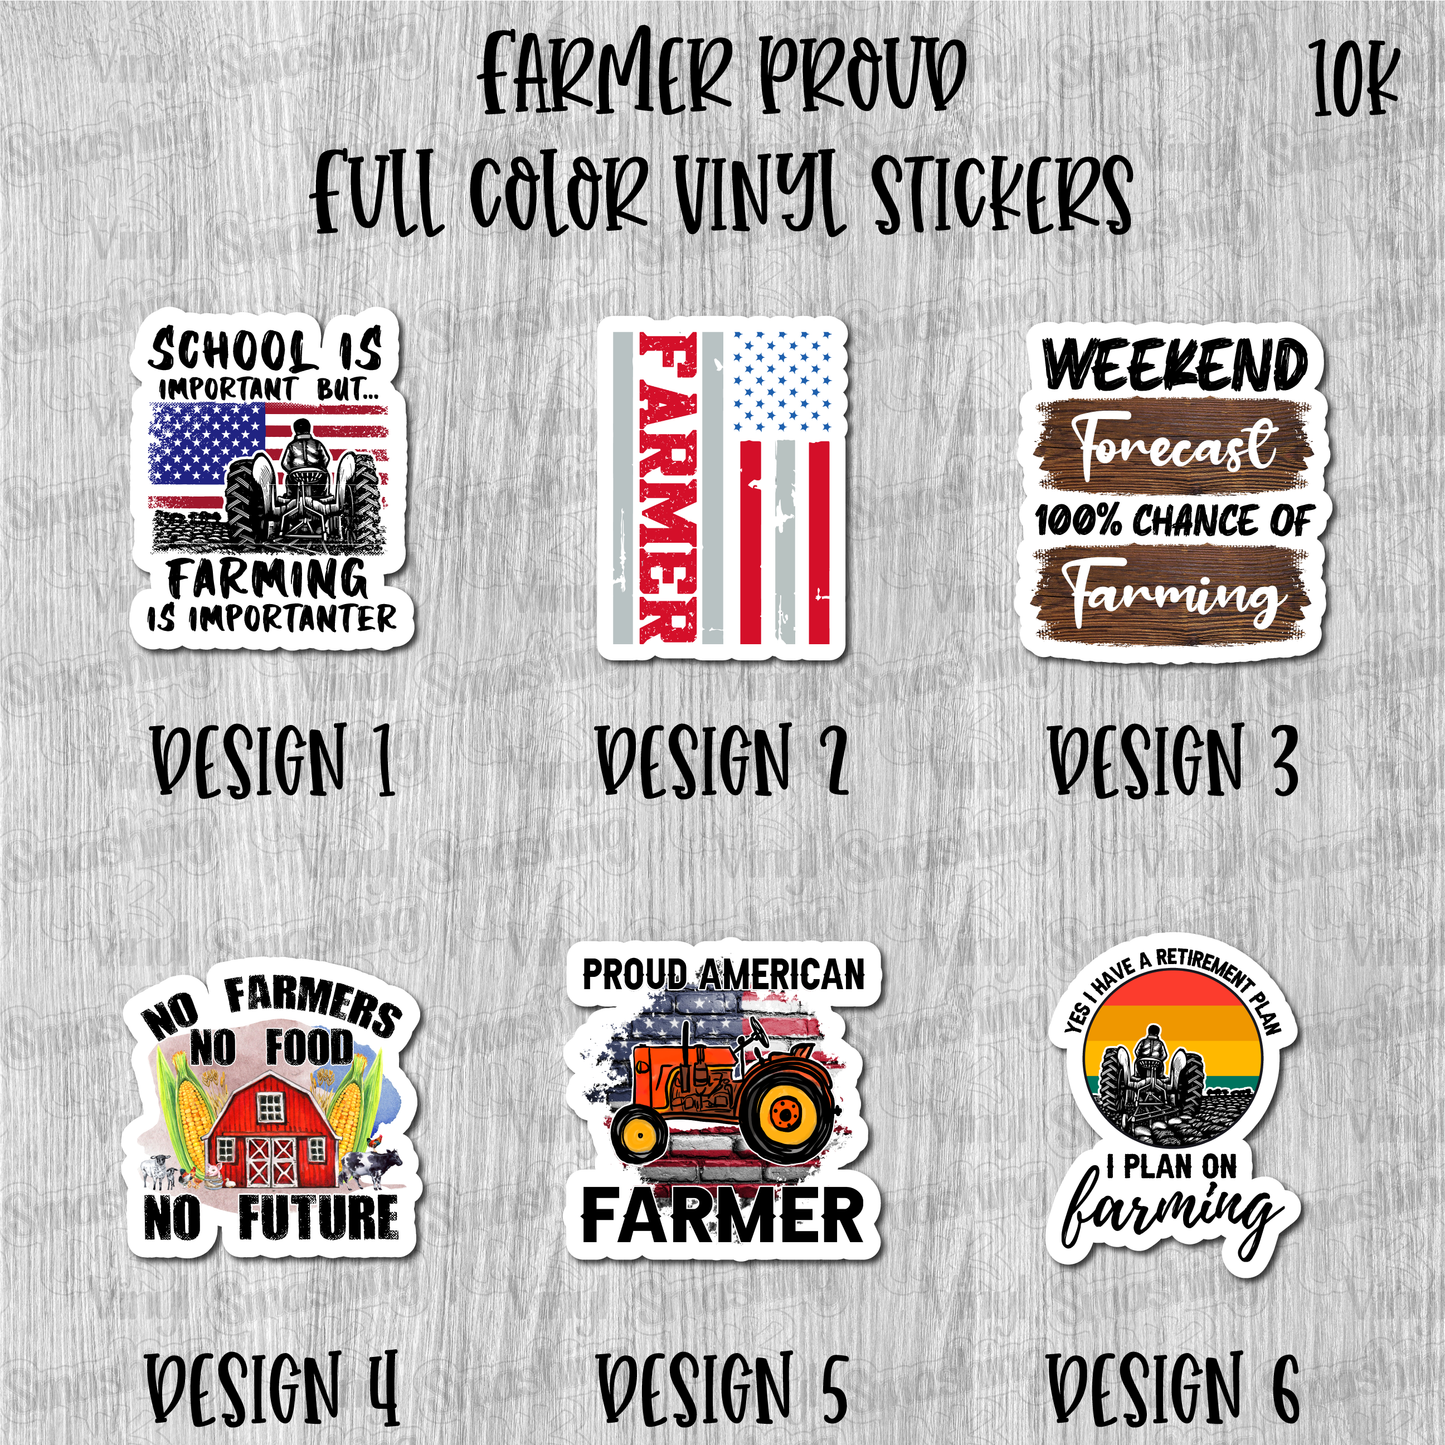 Farmer Proud - Full Color Vinyl Stickers (SHIPS IN 3-7 BUS DAYS)